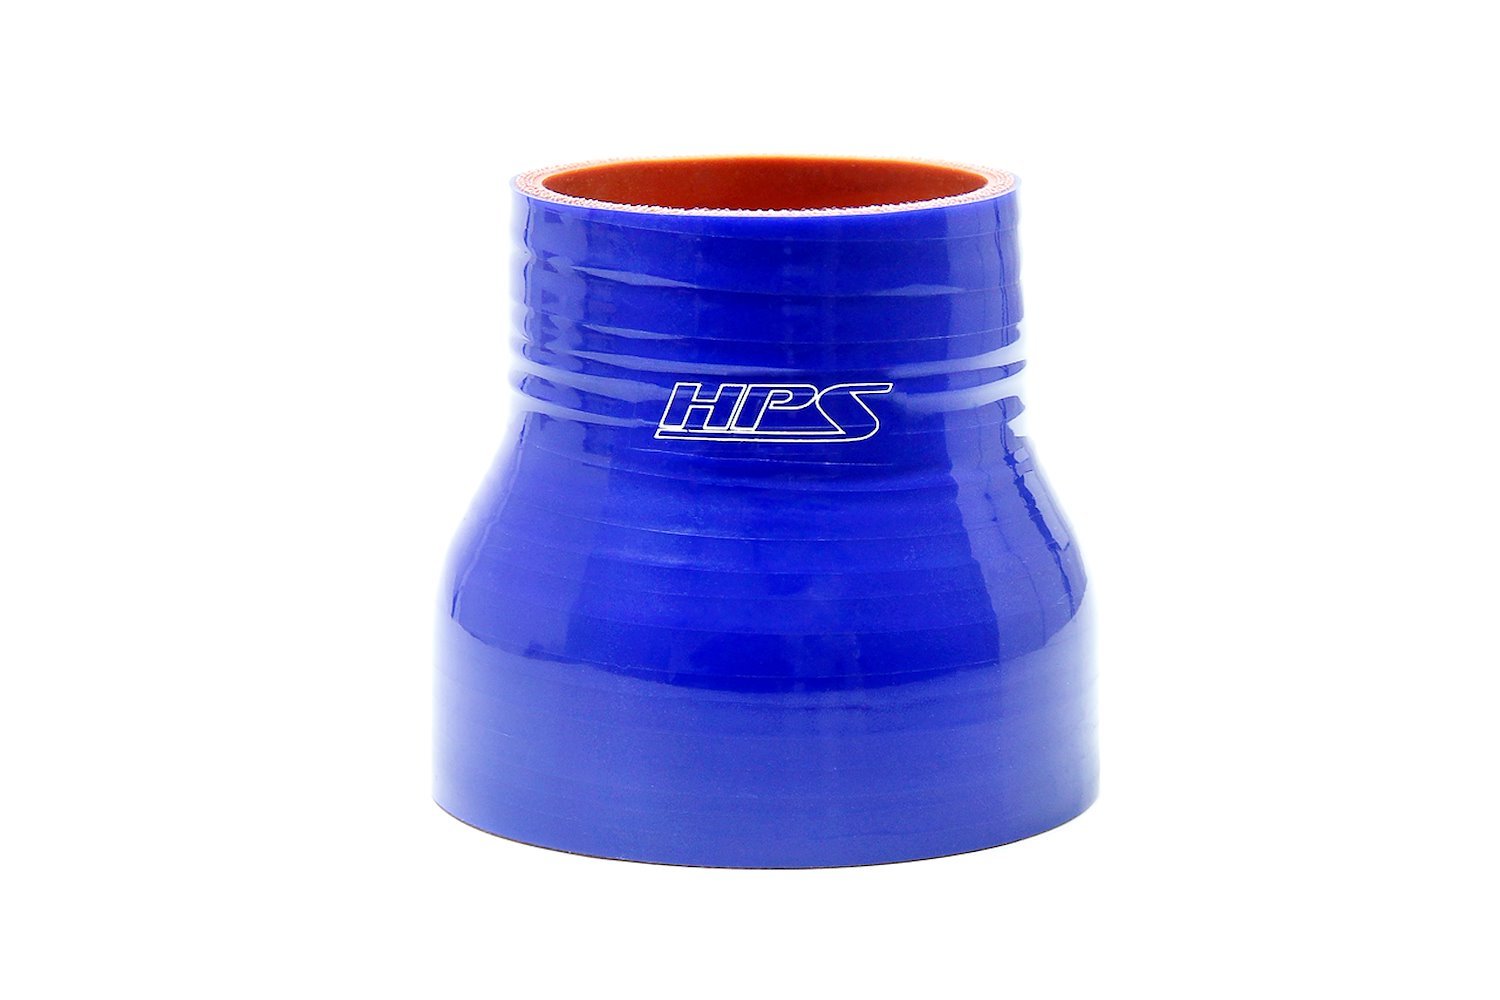 HTSR-212-275-BLUE Silicone Reducer Hose, High-Temp 4-Ply Reinforced, 2-1/8 in. - 2-3/4 in. ID, 3 in. Long, Blue